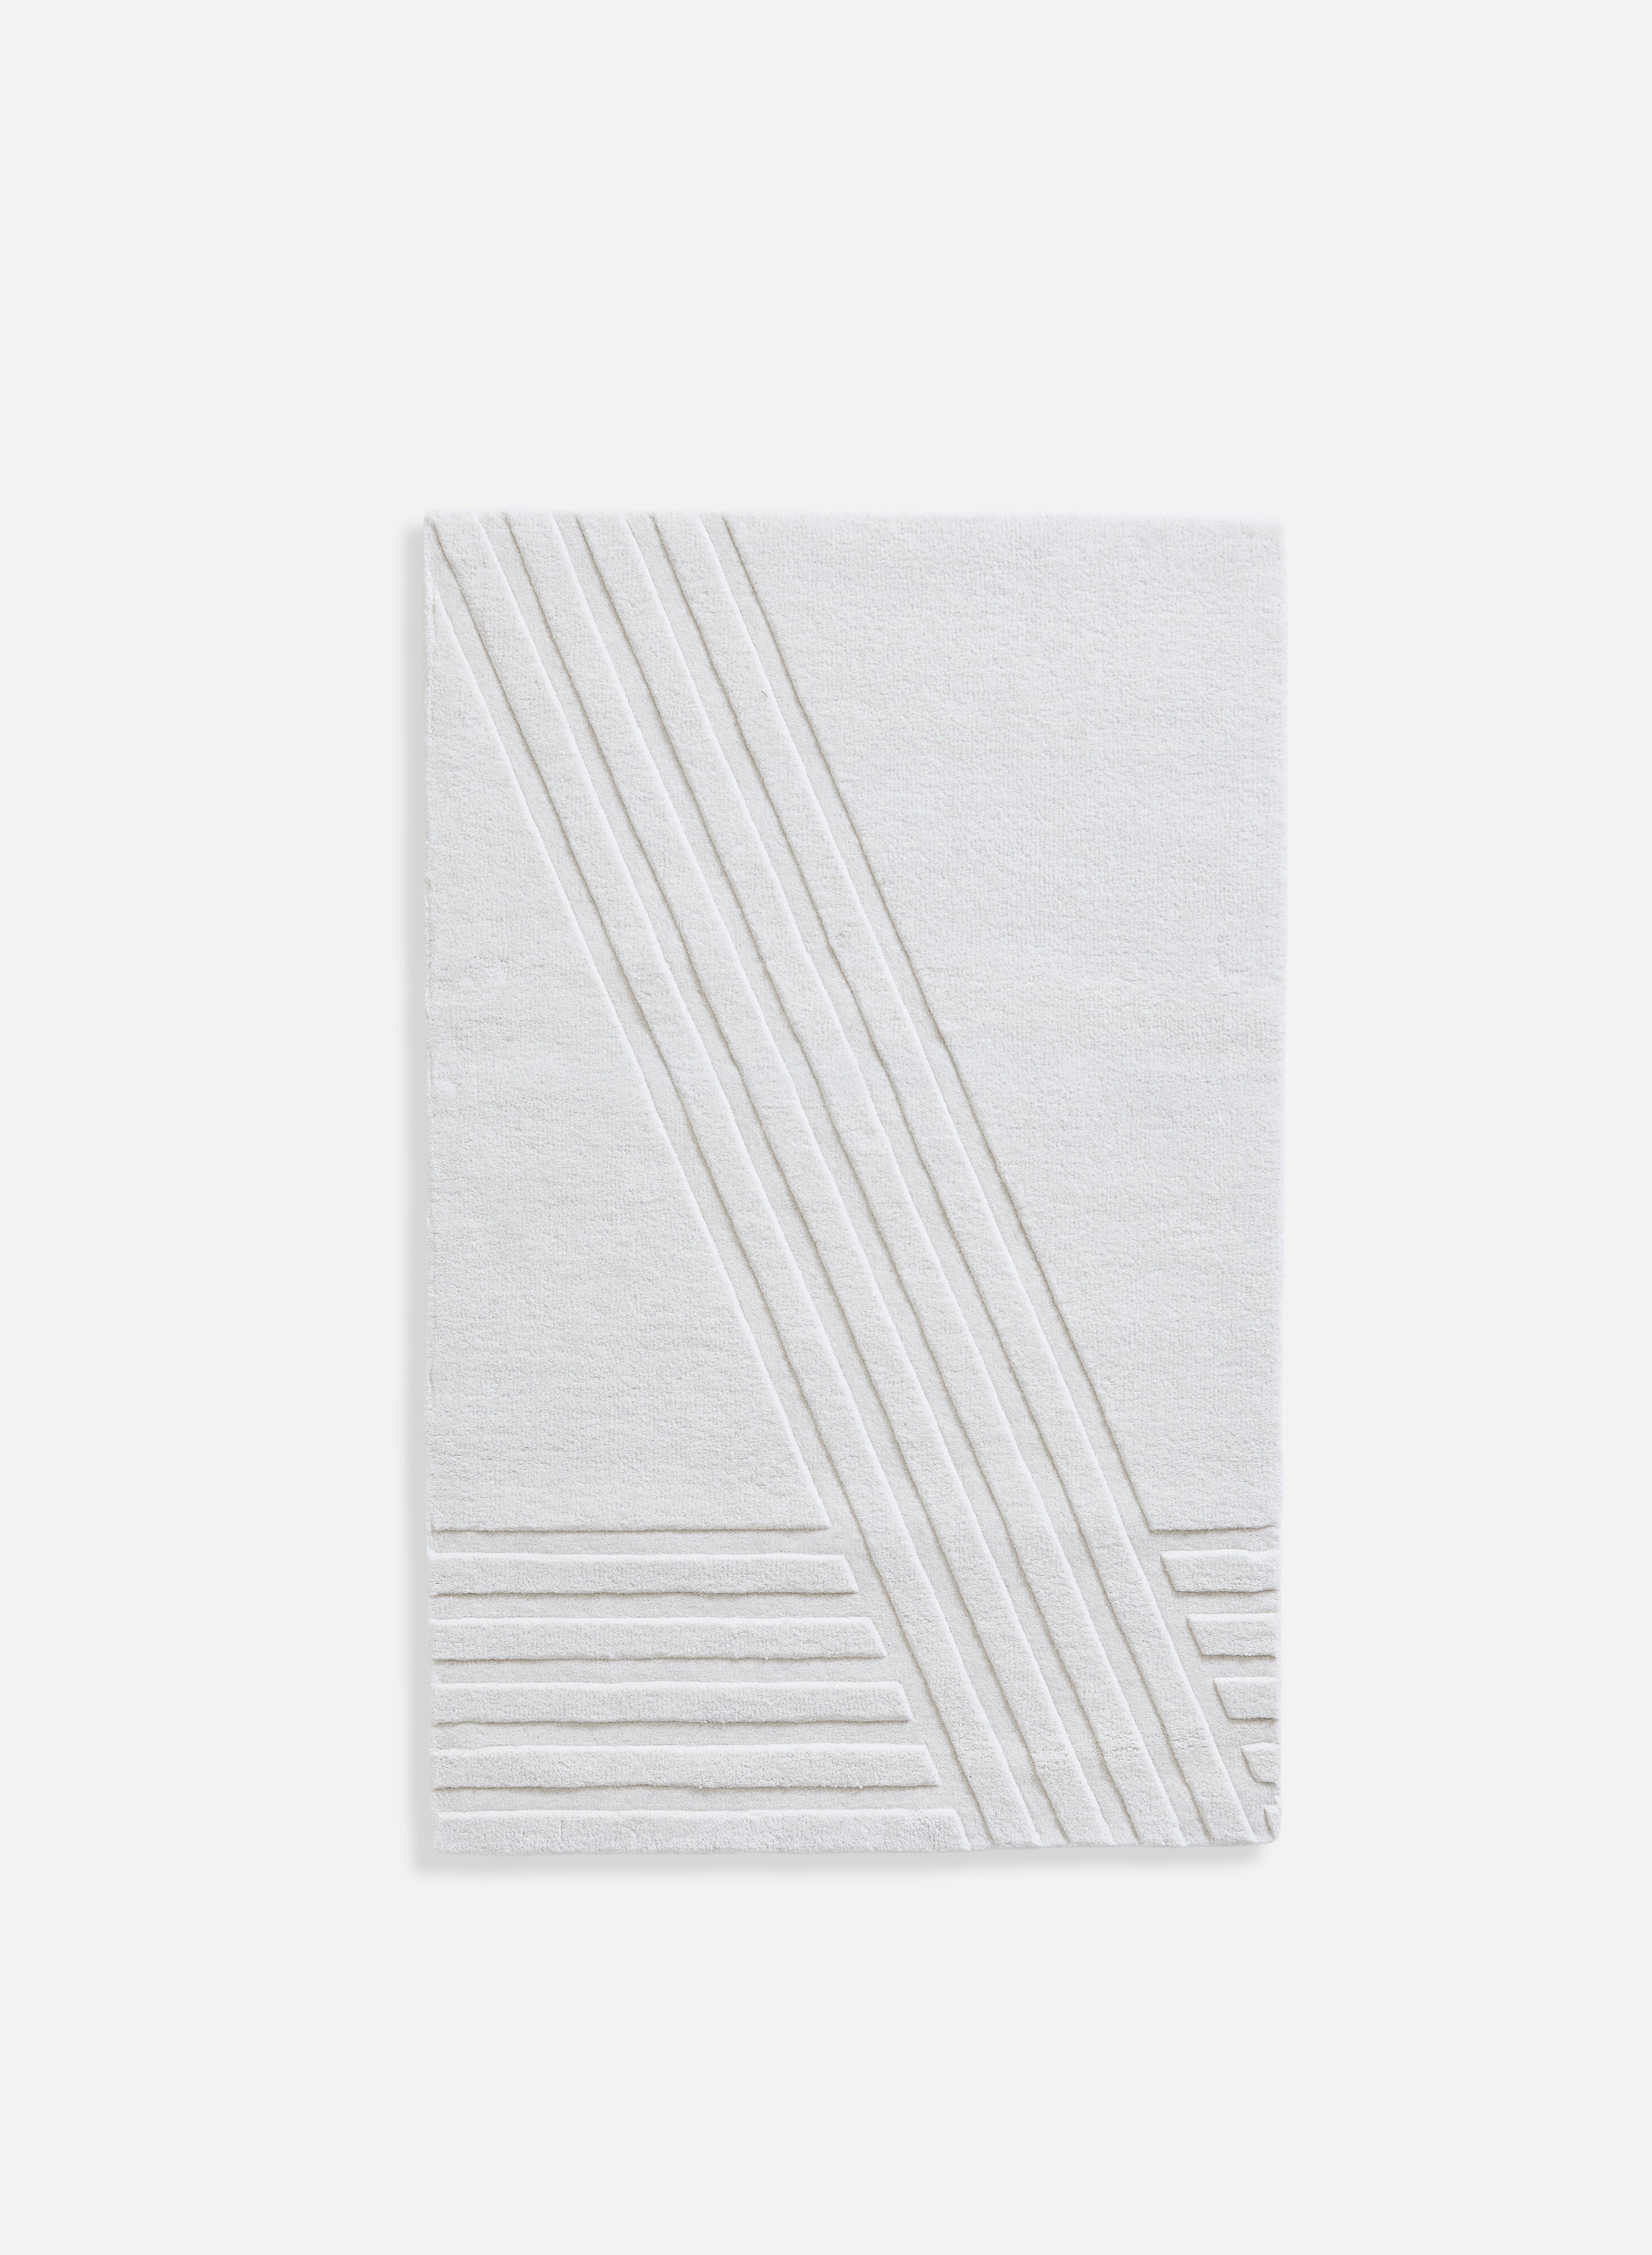 White Kyoto rug I by AD Miller.
Materials: 80% wool, 20% cotton.
Dimensions: W 90 x L 140 cm
Available in grey or off white.

The hand-tufted wool rug, Kyoto, takes its inspiration from the distinctive pattern found in traditional raked